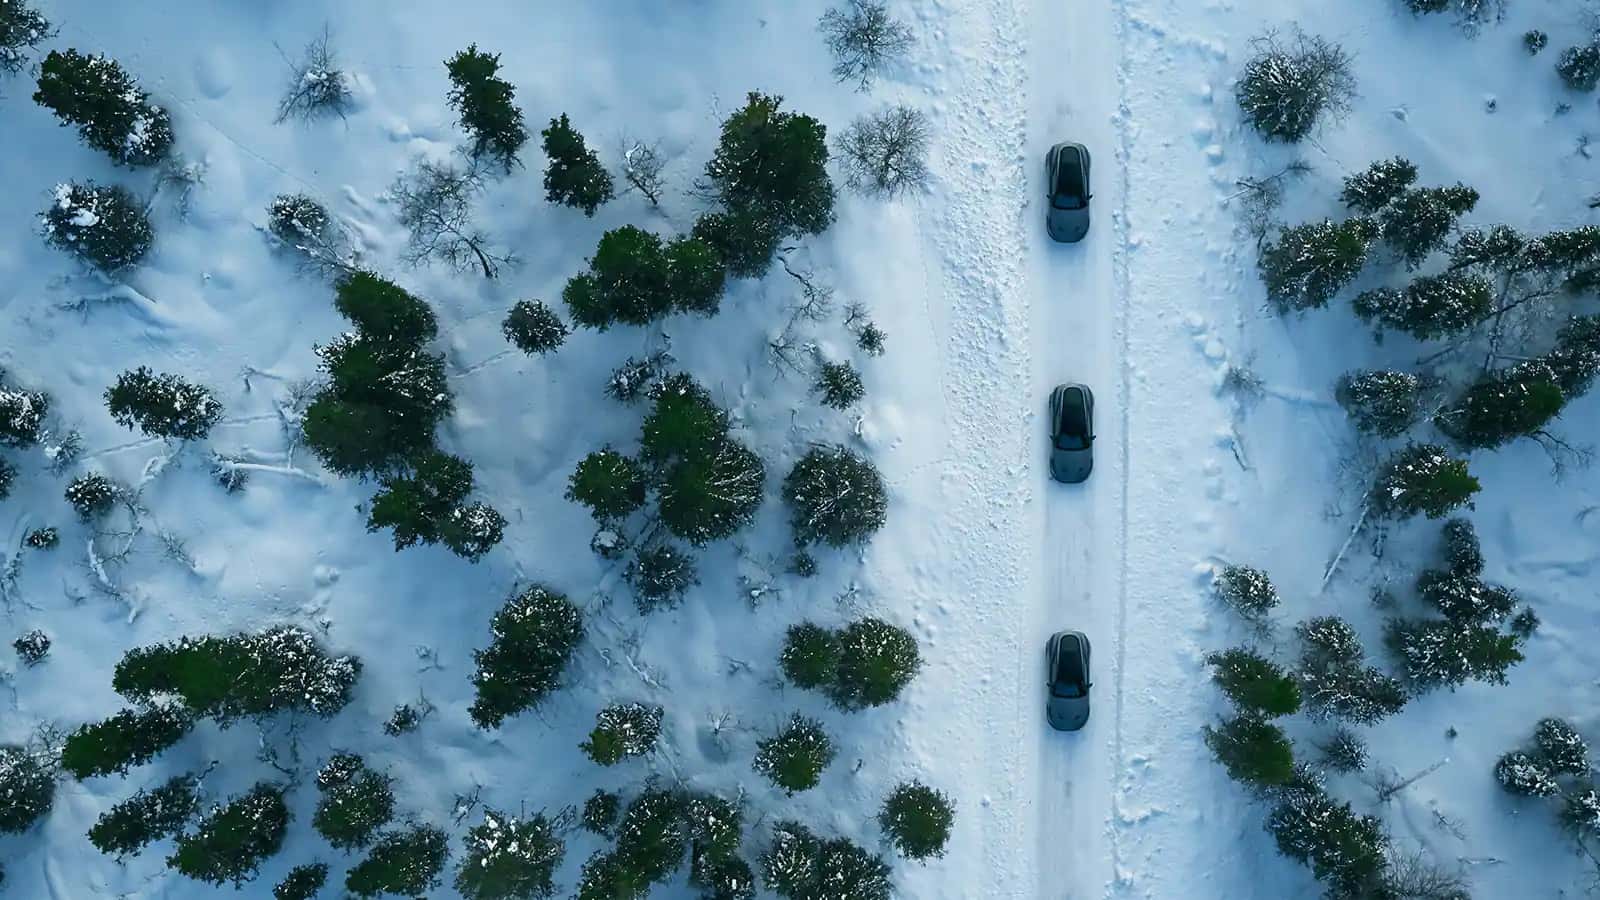 Aerial image of cars driving through snow in forest